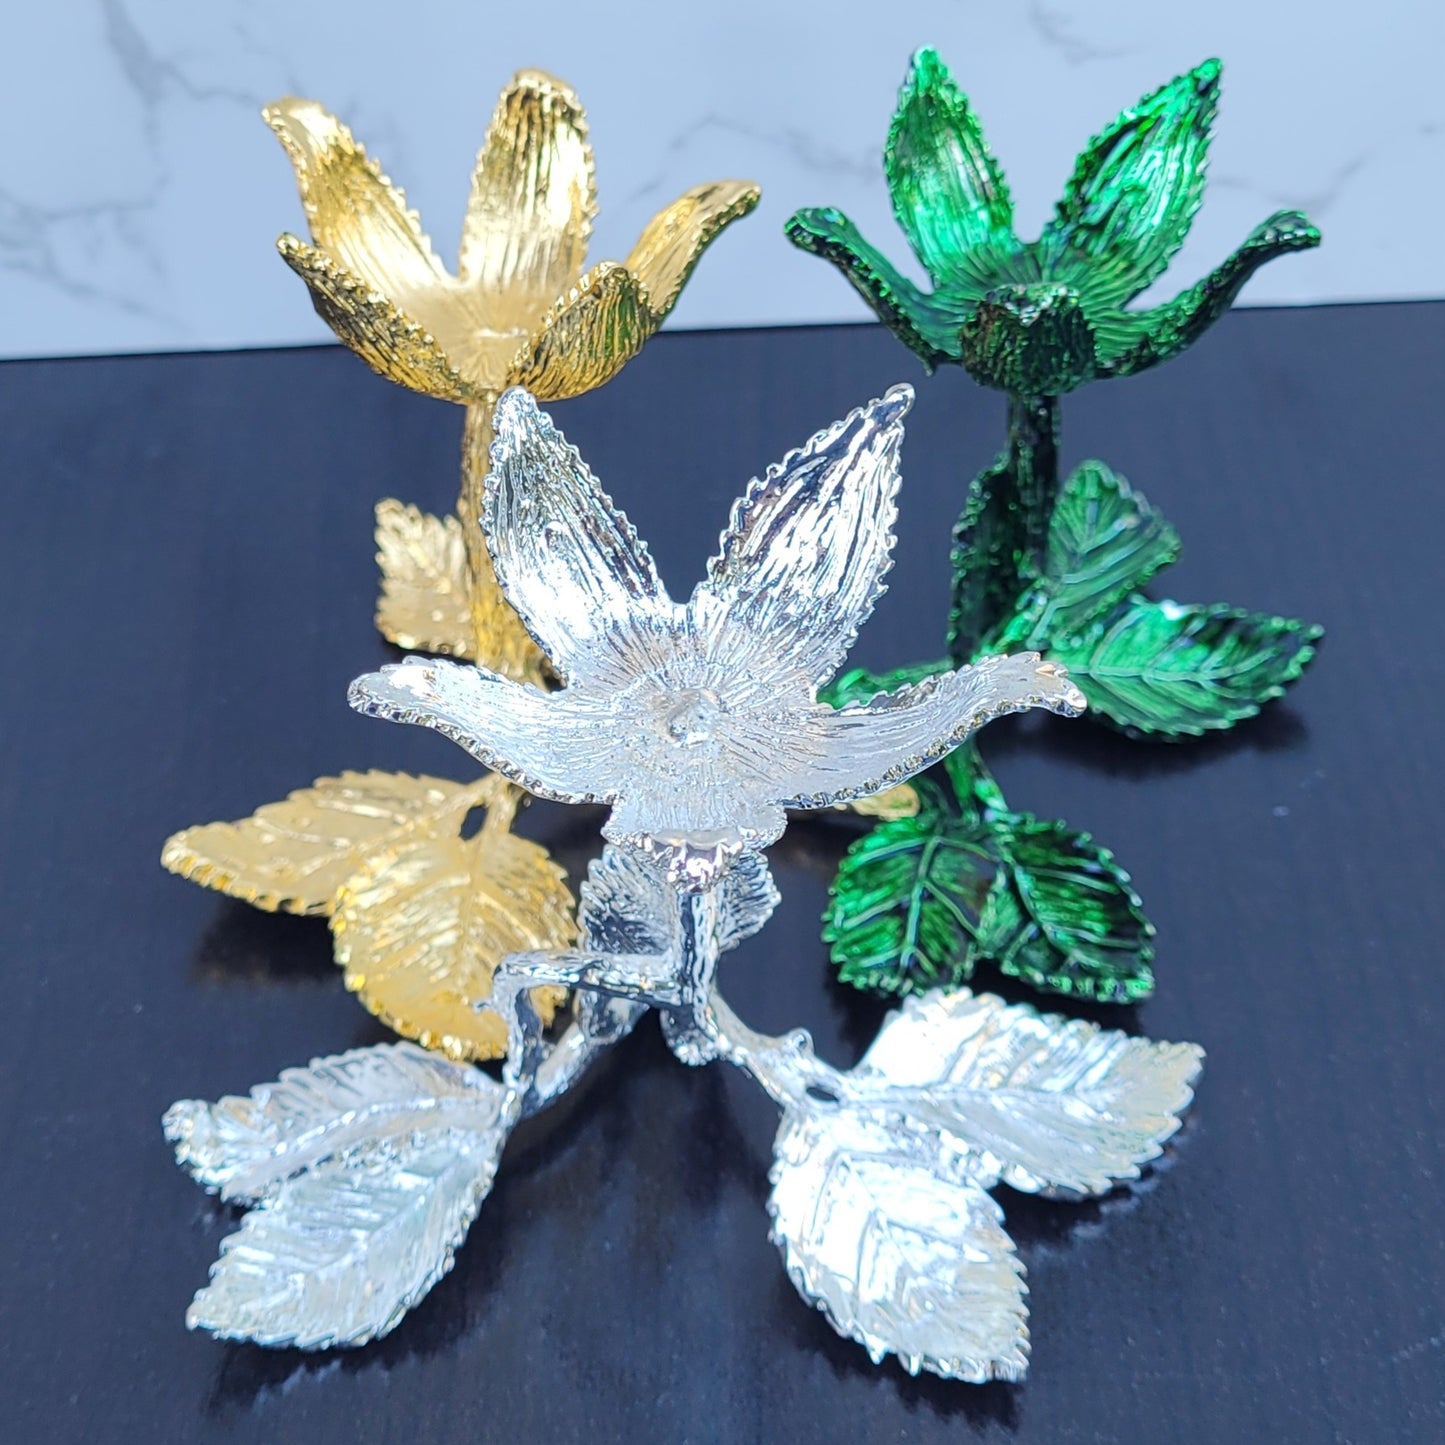 Metal Flower Sphere Display Stands in Gold, Silver or Green, for Crystal Balls 1.5" to 3.2"